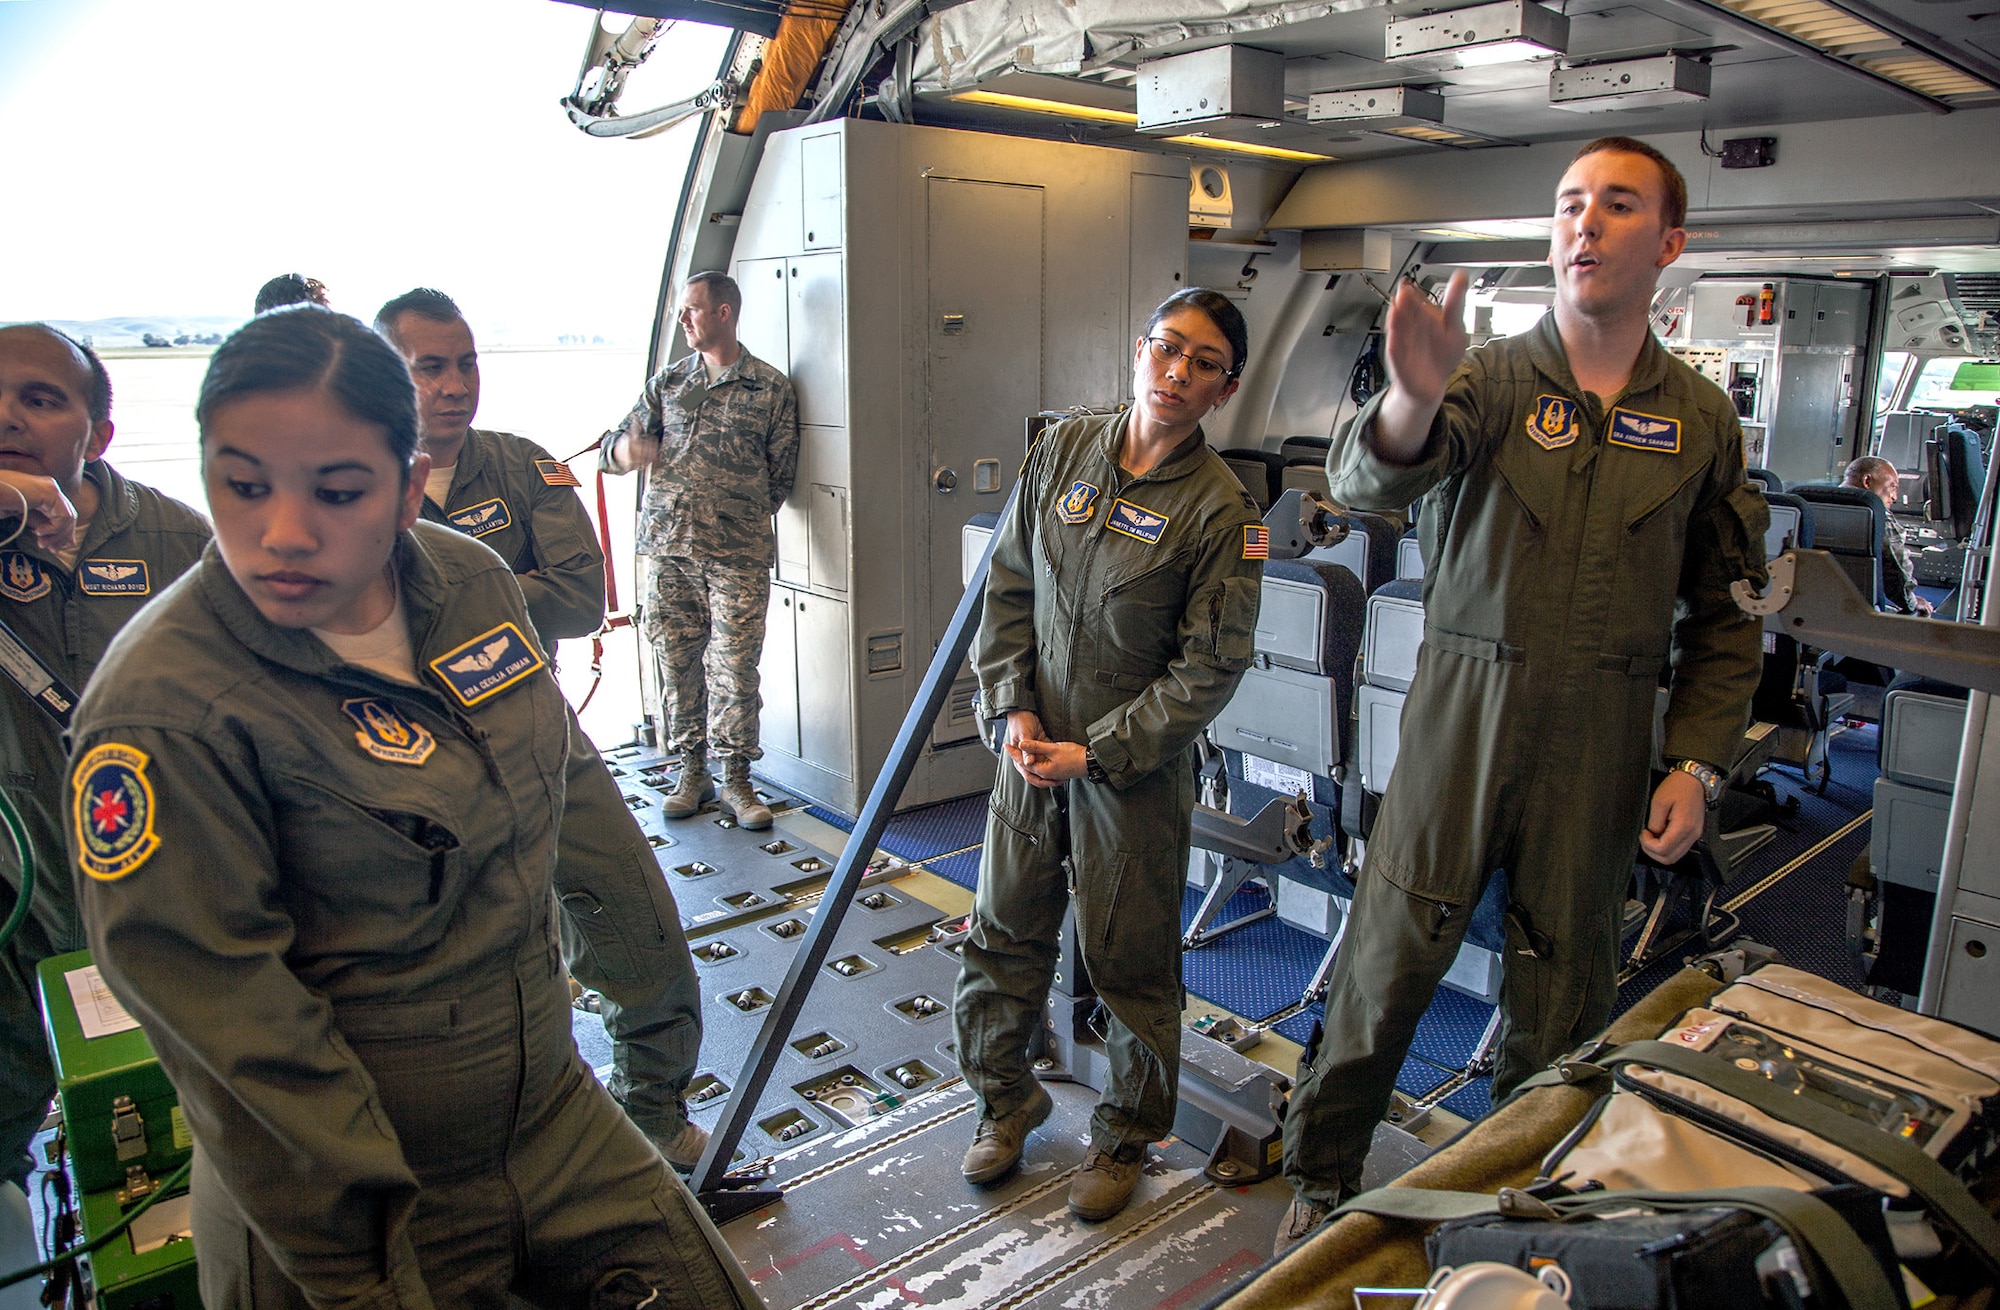 TRAVIS AIR FORCE BASE, Calif. -- Senior Airman Andrew P. Sahagun (right), an aeromedical evacuation specialist with the 349th Aeromedical Evacuation Squadron, conducts a training class on the specialized procedures for using a KC-10A Extender for opportune aeromedical evaluation at Travis Air Force Base, Calif., Feb. 23, 2014.   Capt. Janette S. Williford (center), flight nurse and Senior Airman Cecilia A. Ehman (left), aeromedical evacuation specialist, participate in the class. Unlike the C-17 Globemaster III, the KC-10 was not designed with aeromedical evaluation in mind, but can be configured for the mission when needed. During the Unit Training Assembly of Feb. 22-23, squadrons from across the 349th Air Mobility Wing conducted interrelated exercise scenarios, providing Reservists opportunities to achieve core skill proficiency training. (U.S. Air Force photo / Lt. Col. Robert Couse-Baker)